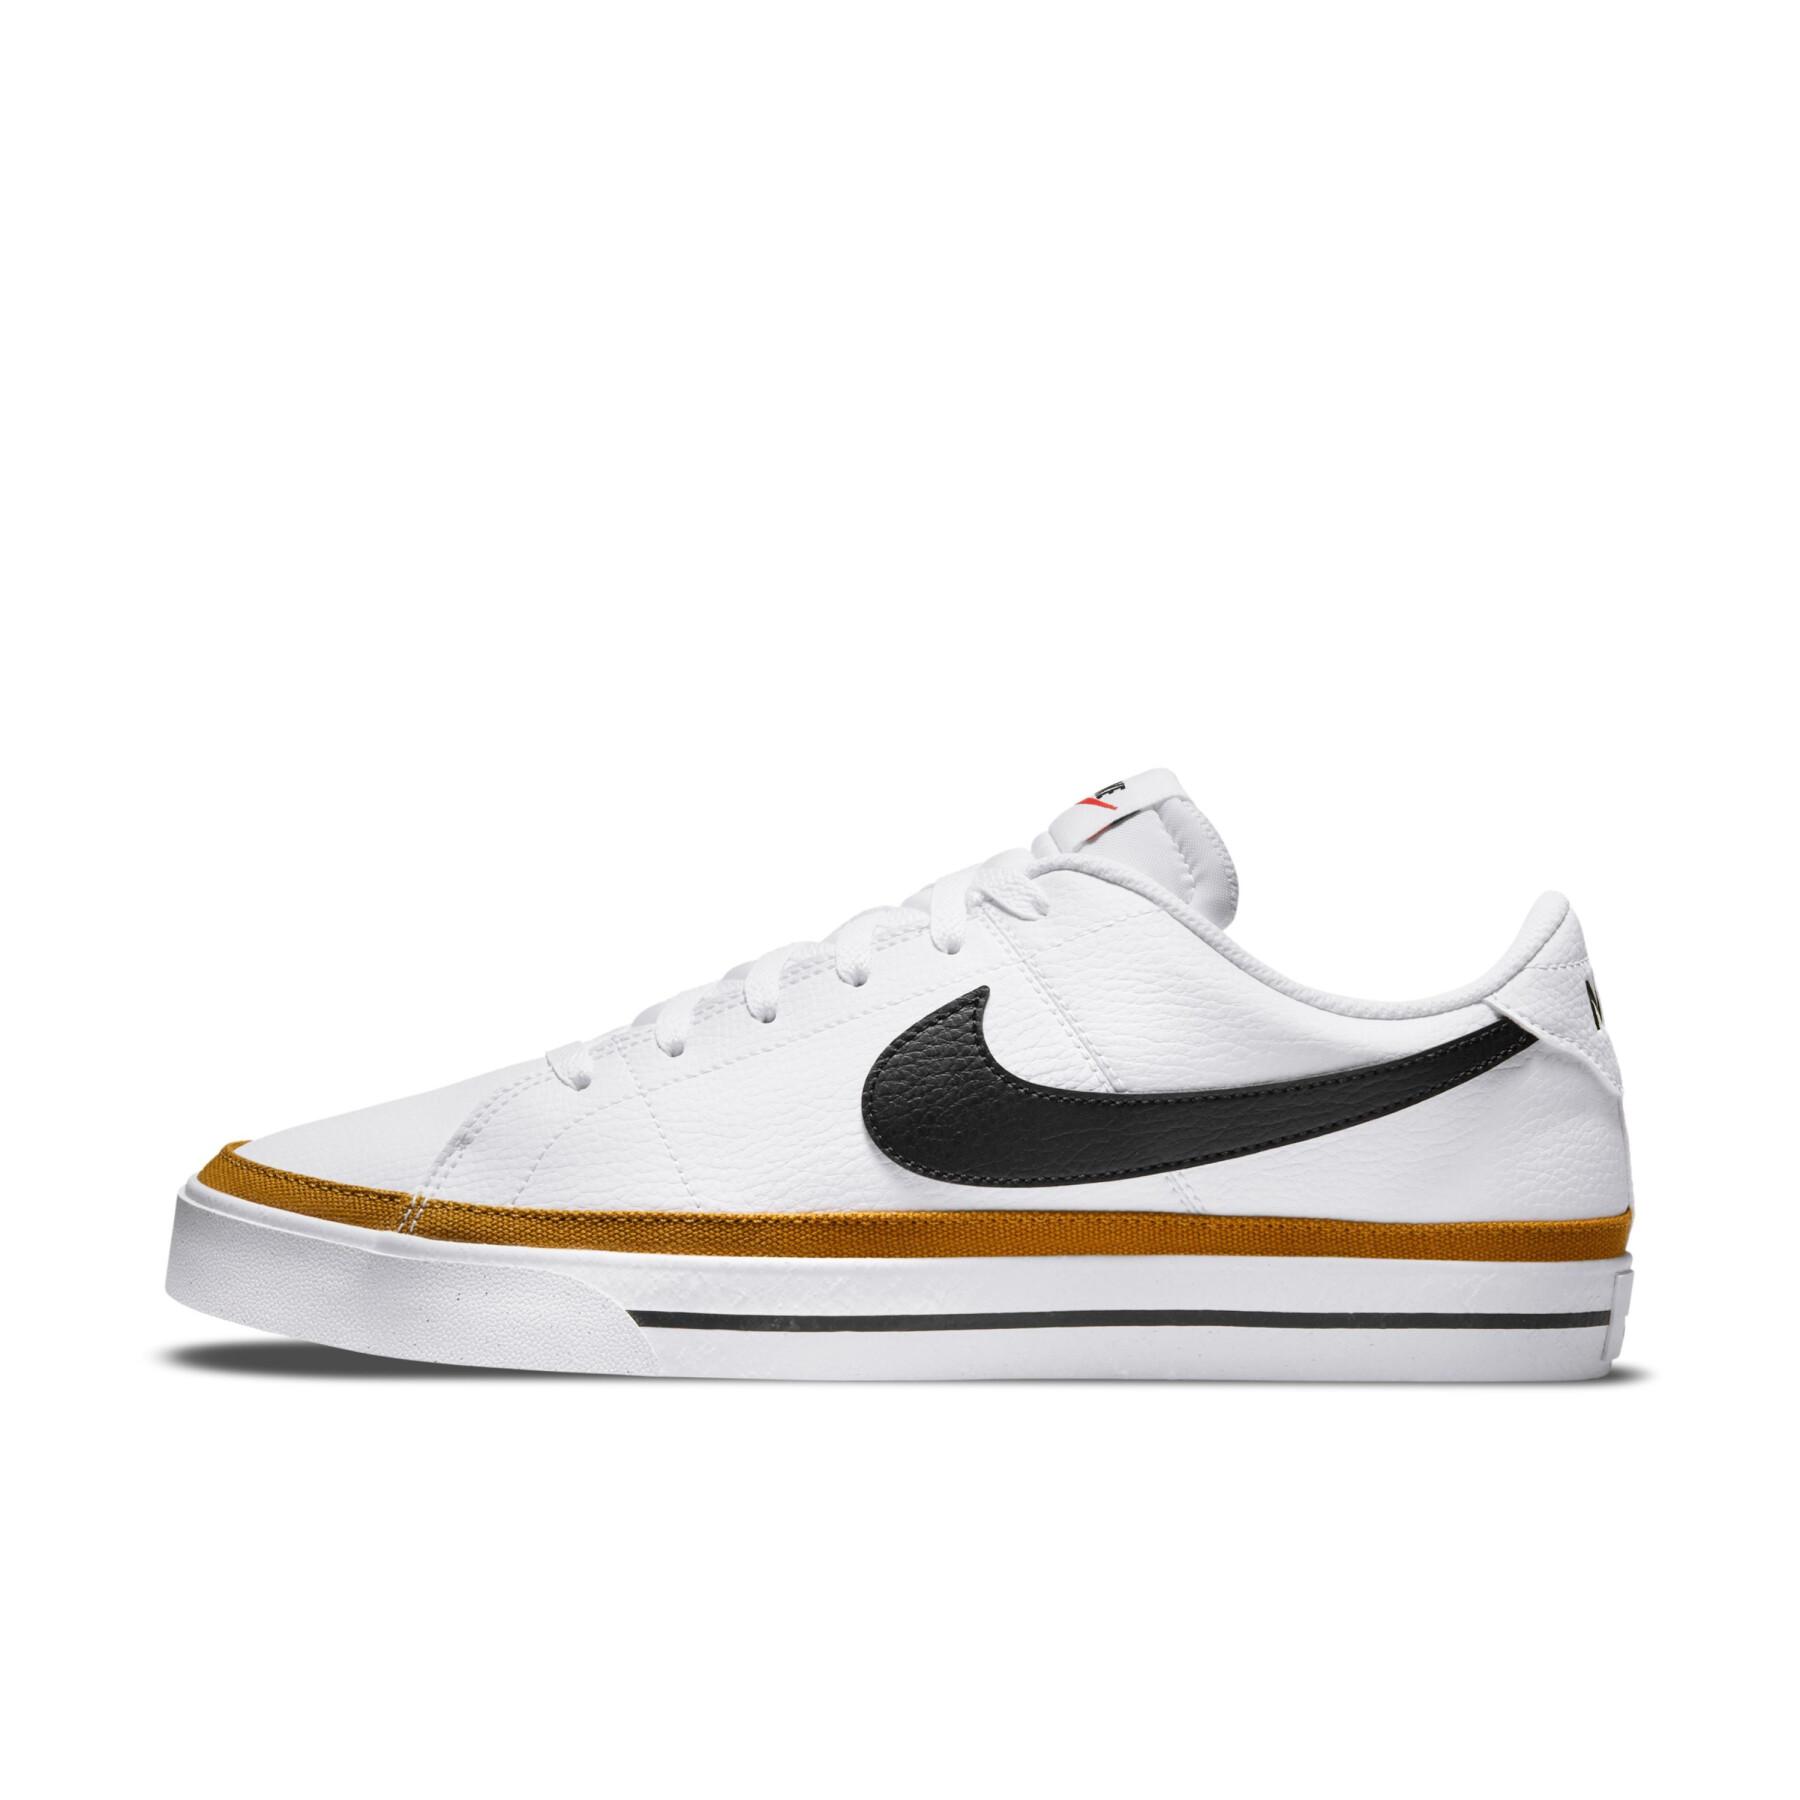 Formadores Nike Court Legacy